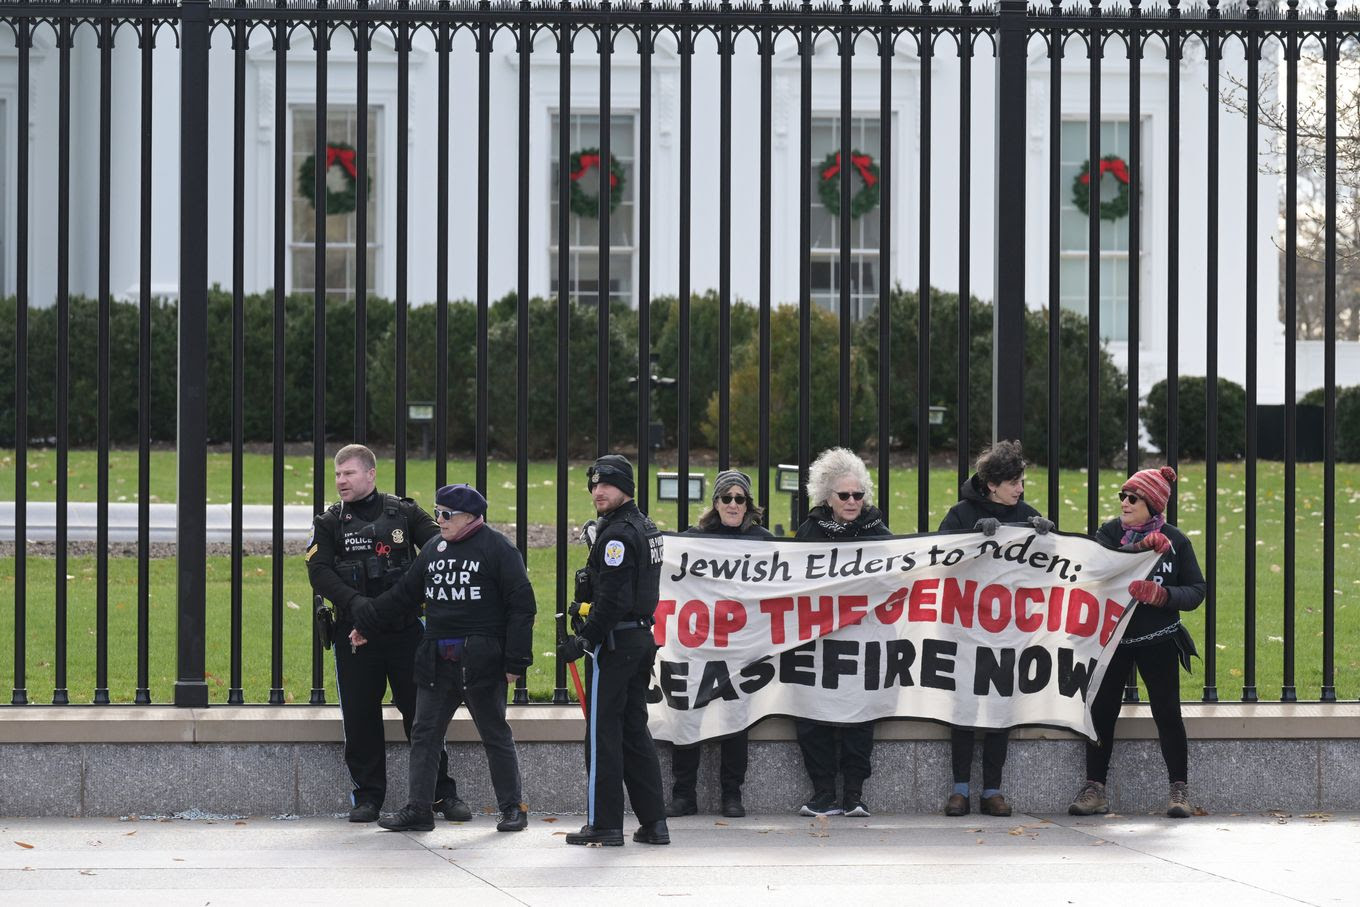 Police detain protesters outside the White House this week. (Matt McClain/The Washington Post)